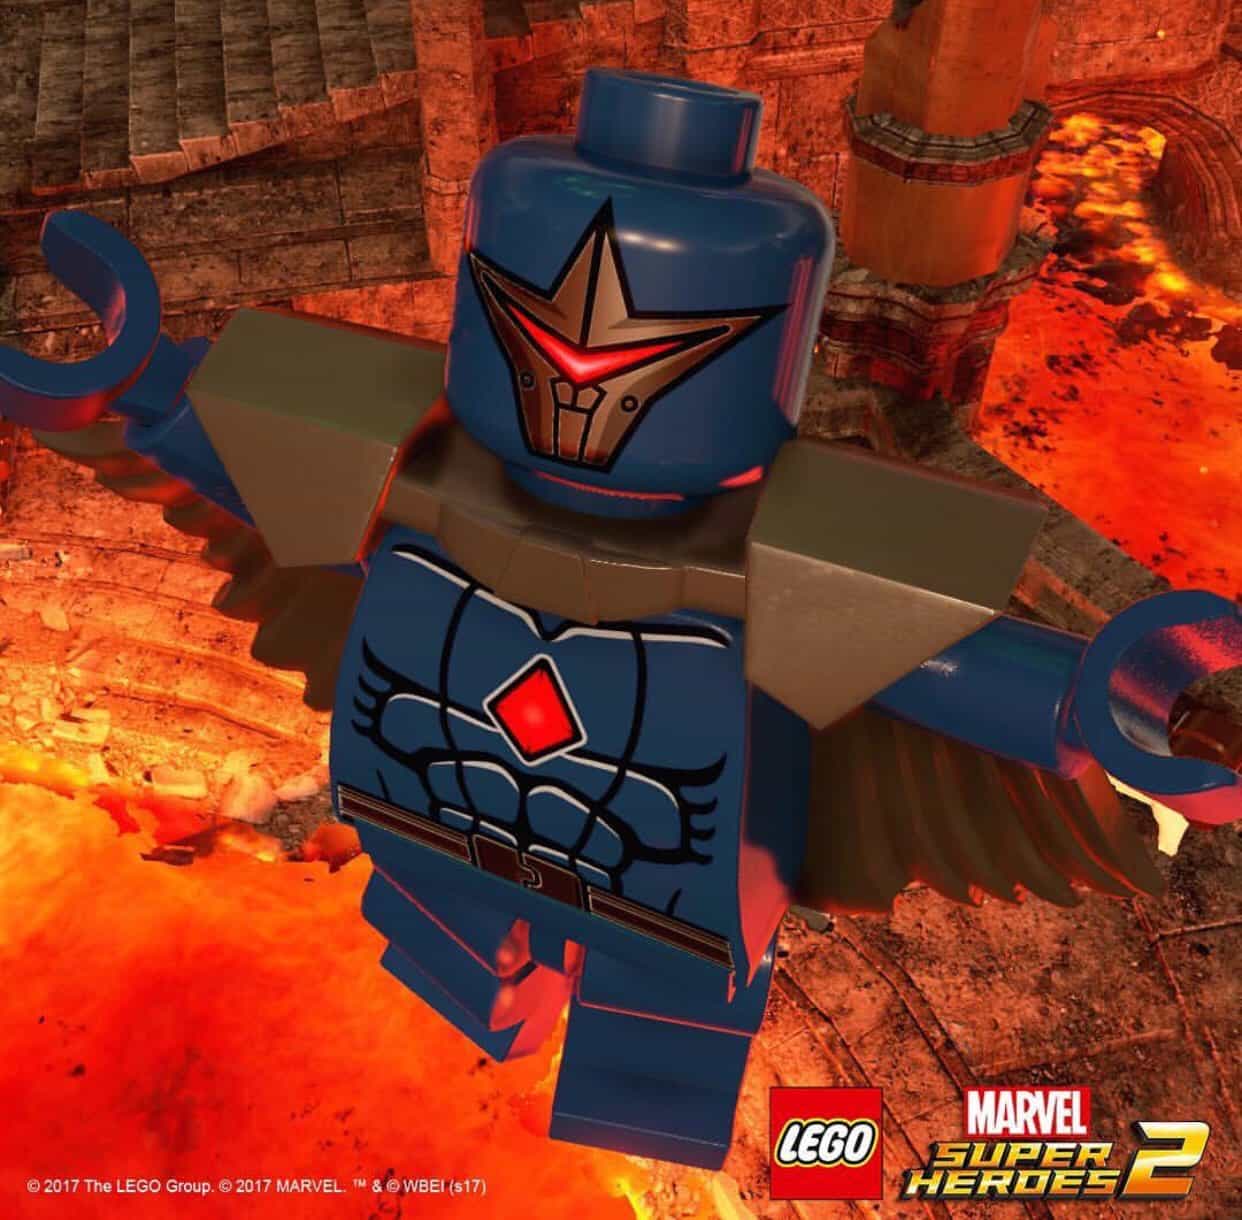 lego marvel super heroes playable characters